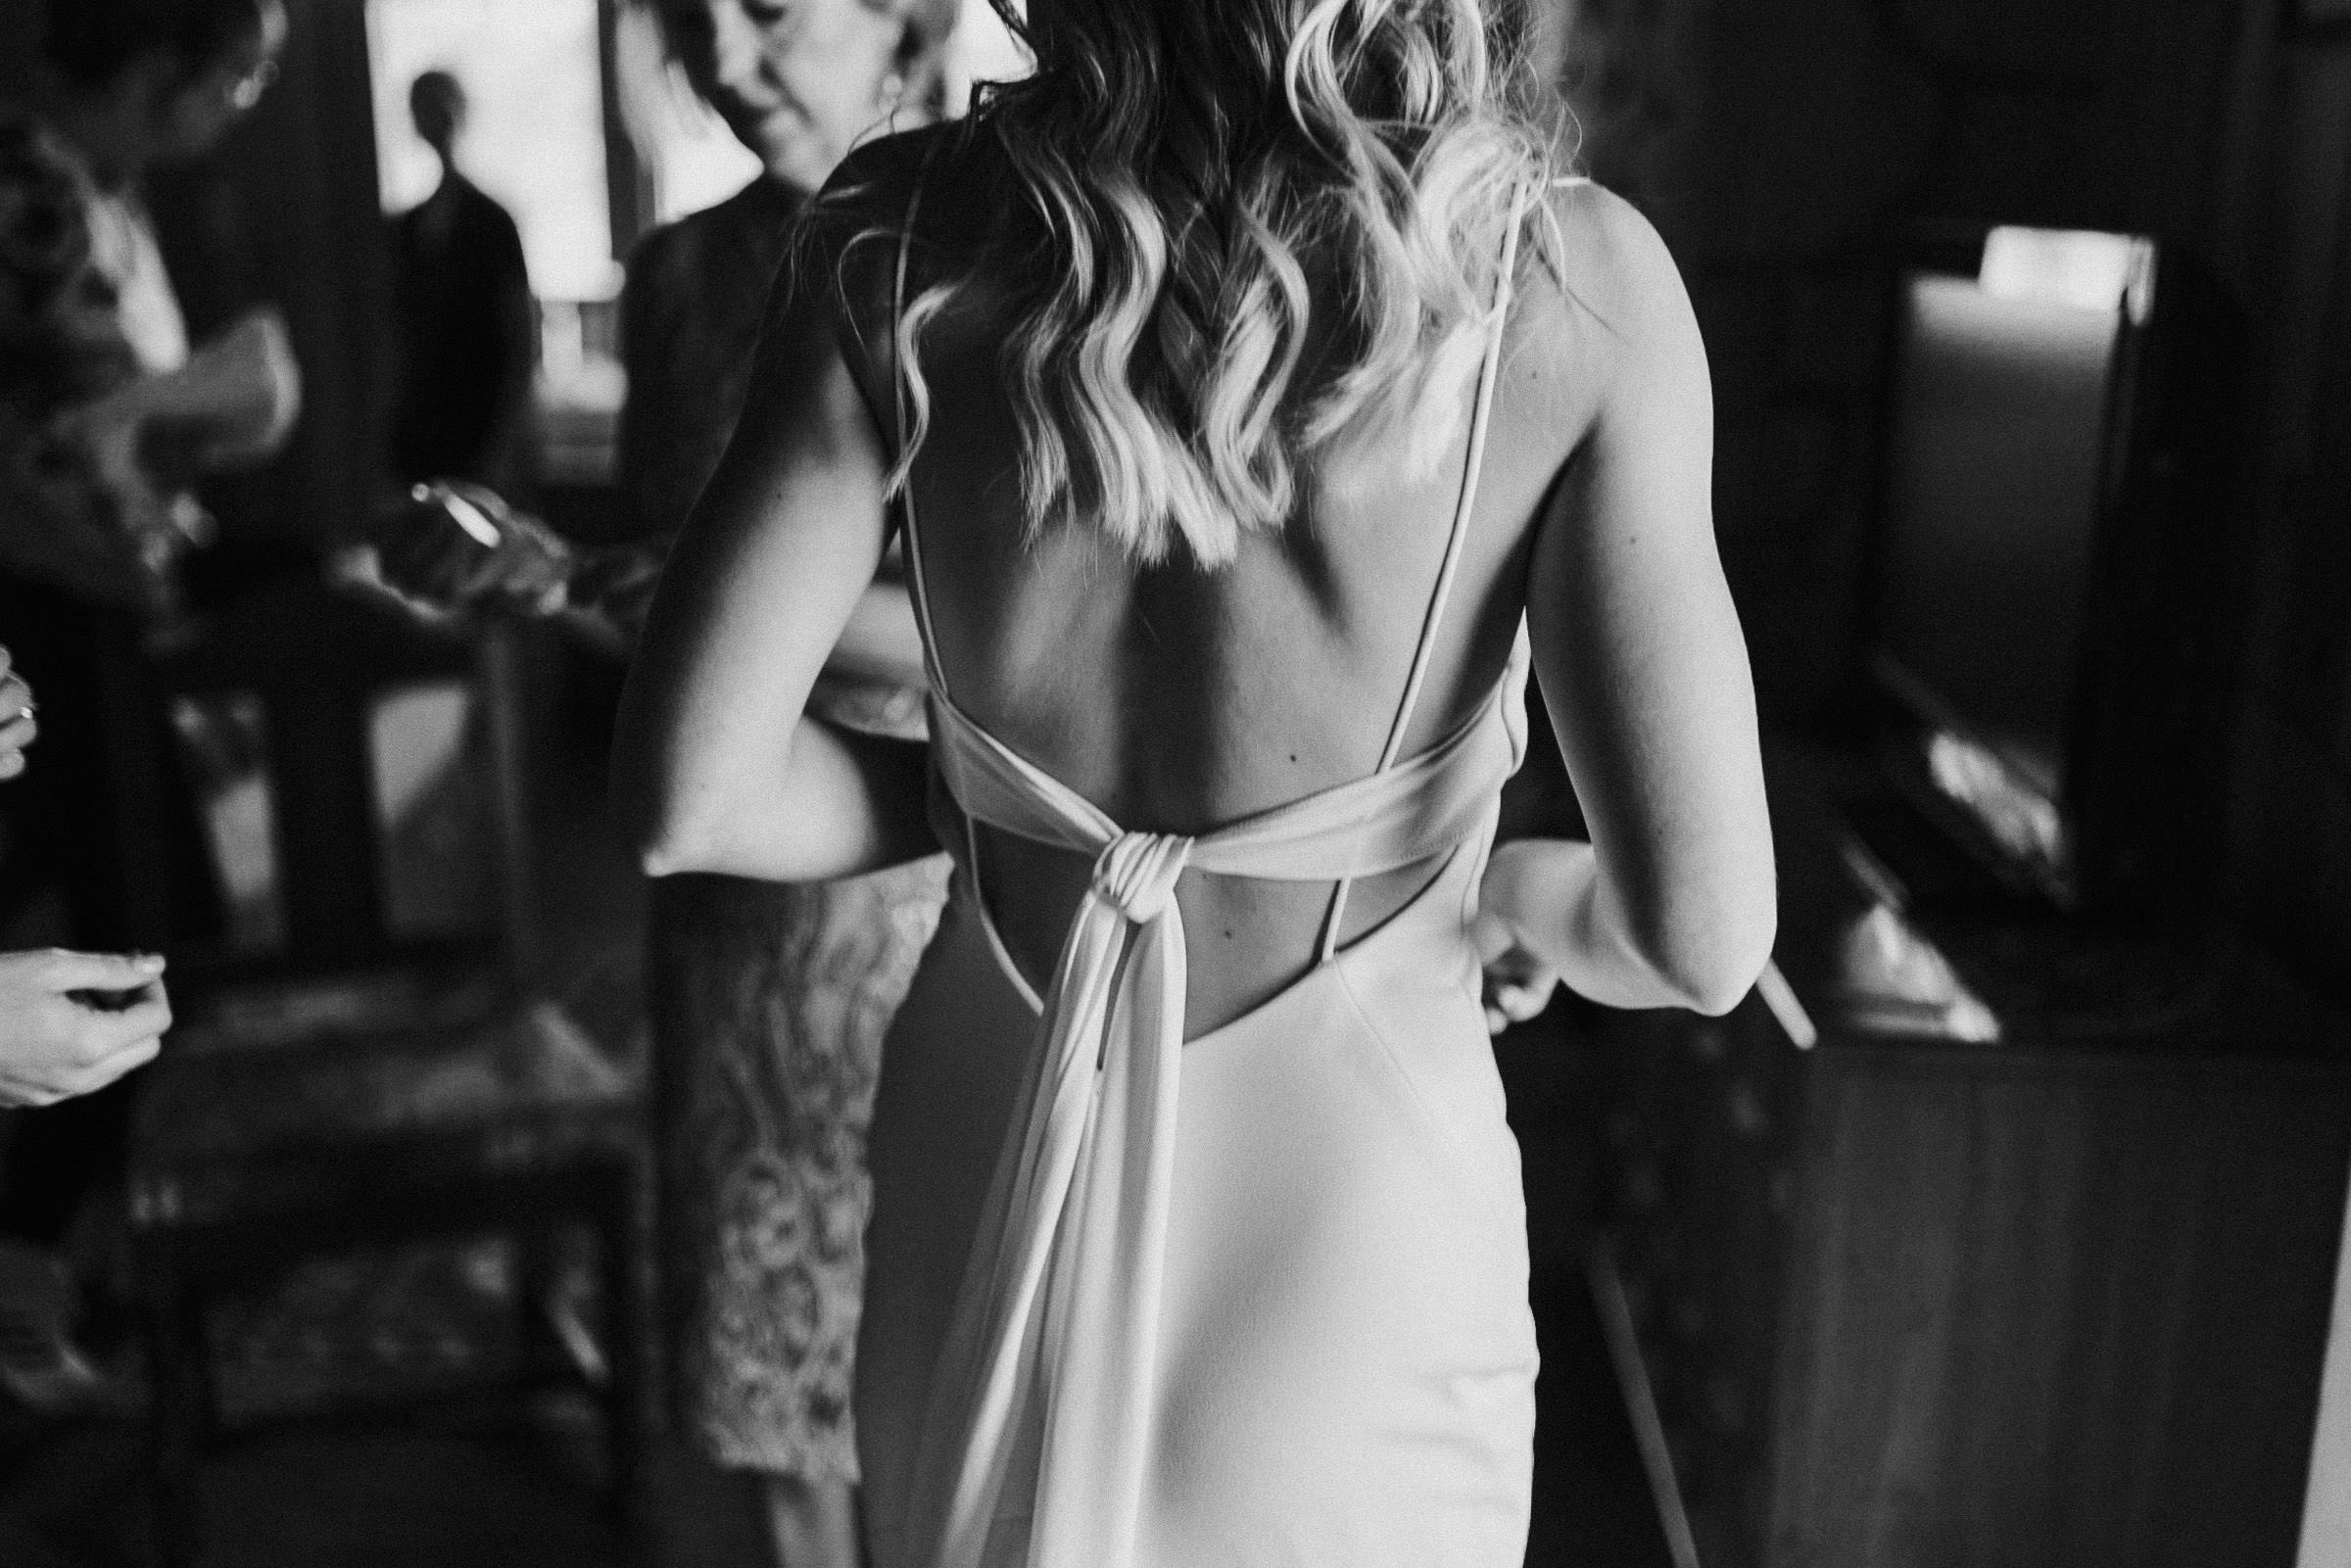 A view of the back of the bride's dress as she gets ready